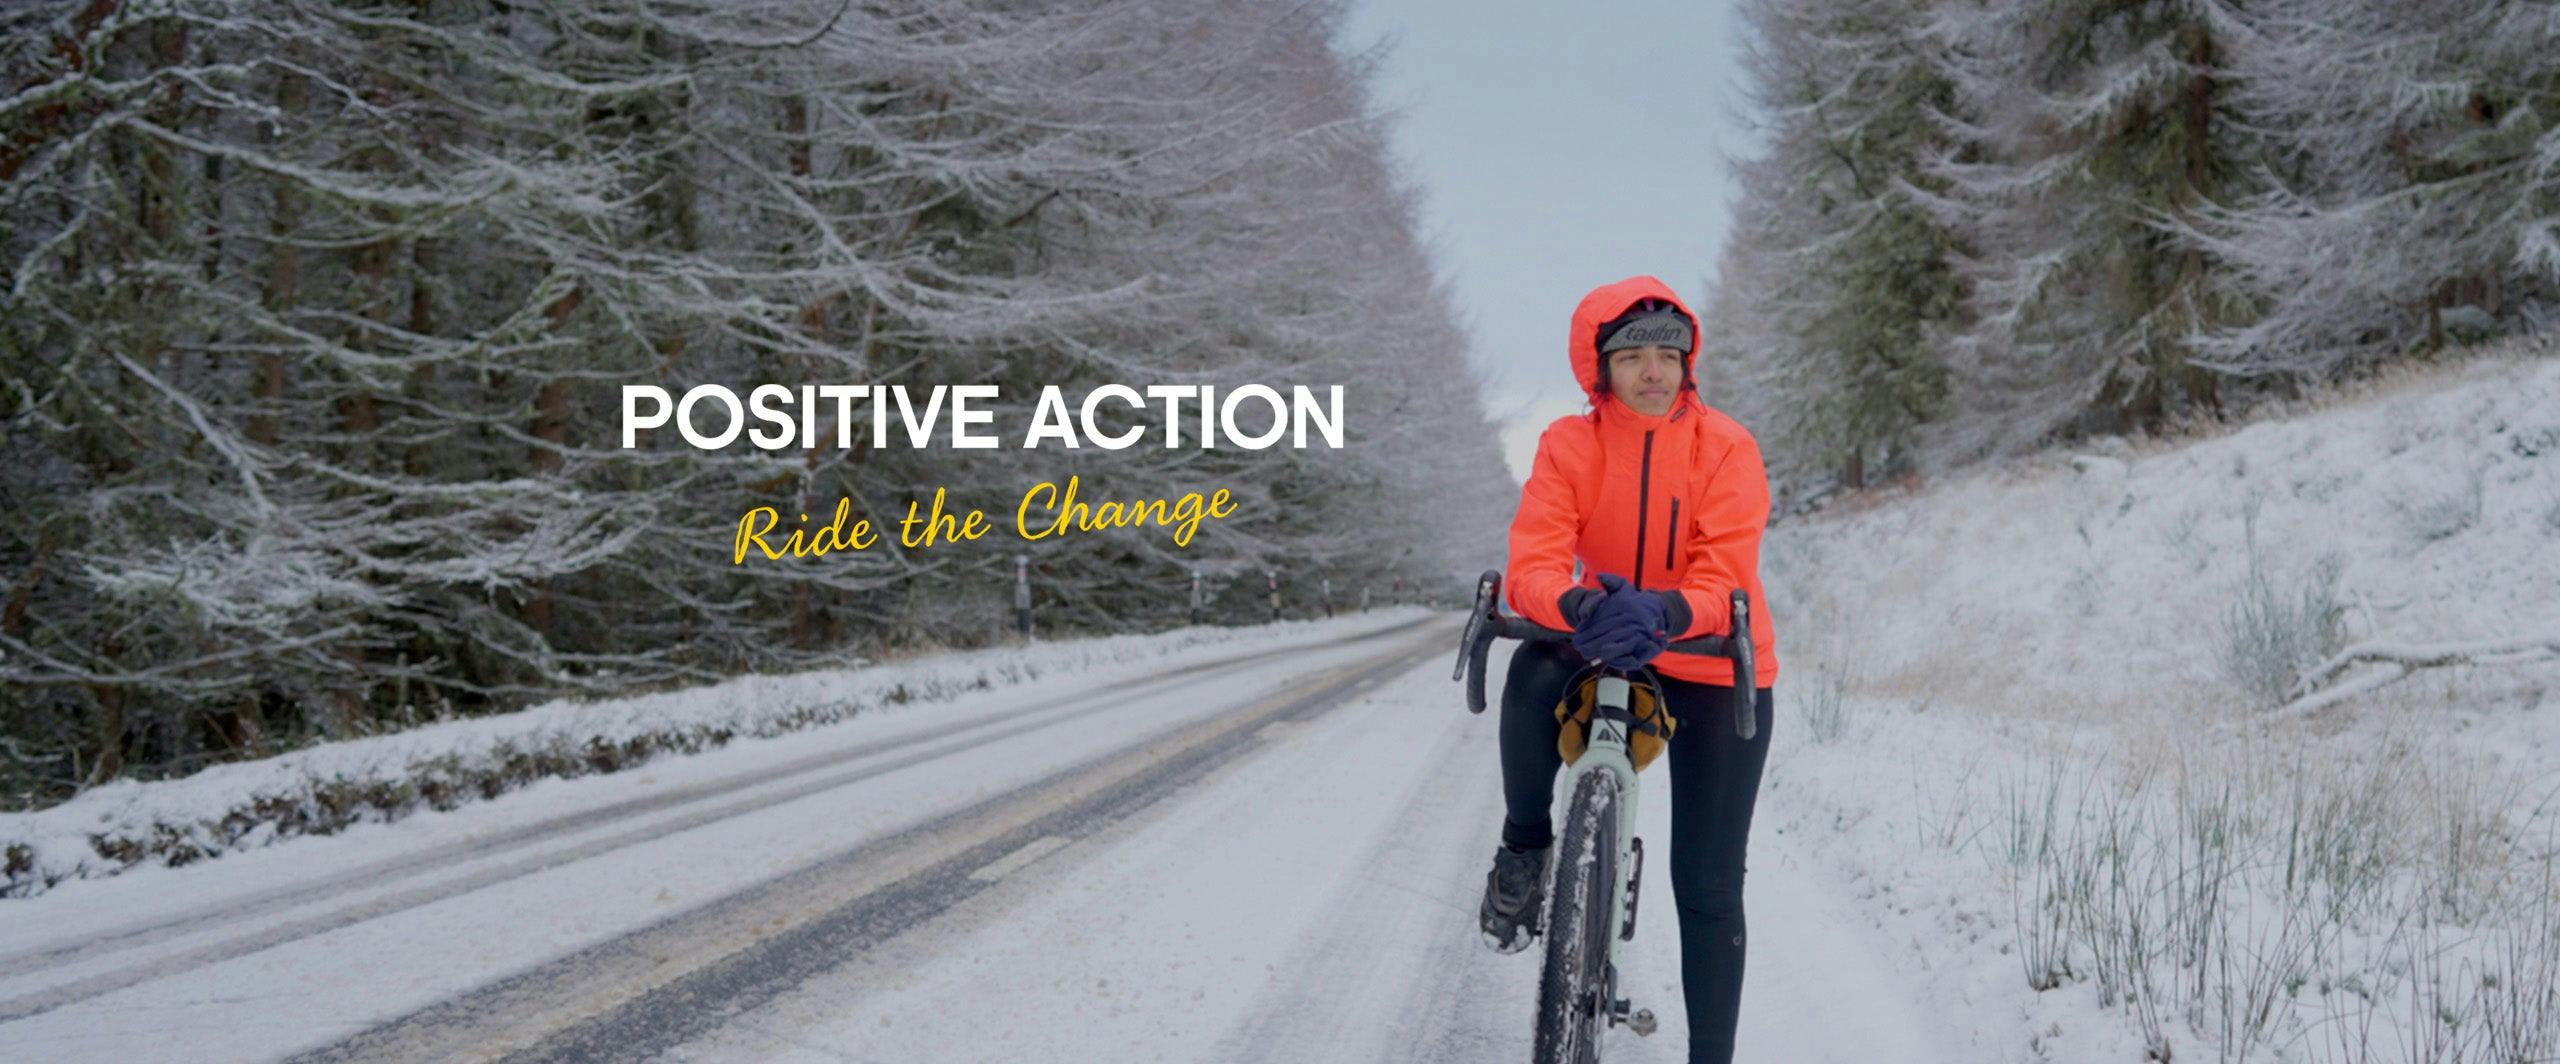 positive action ride the change